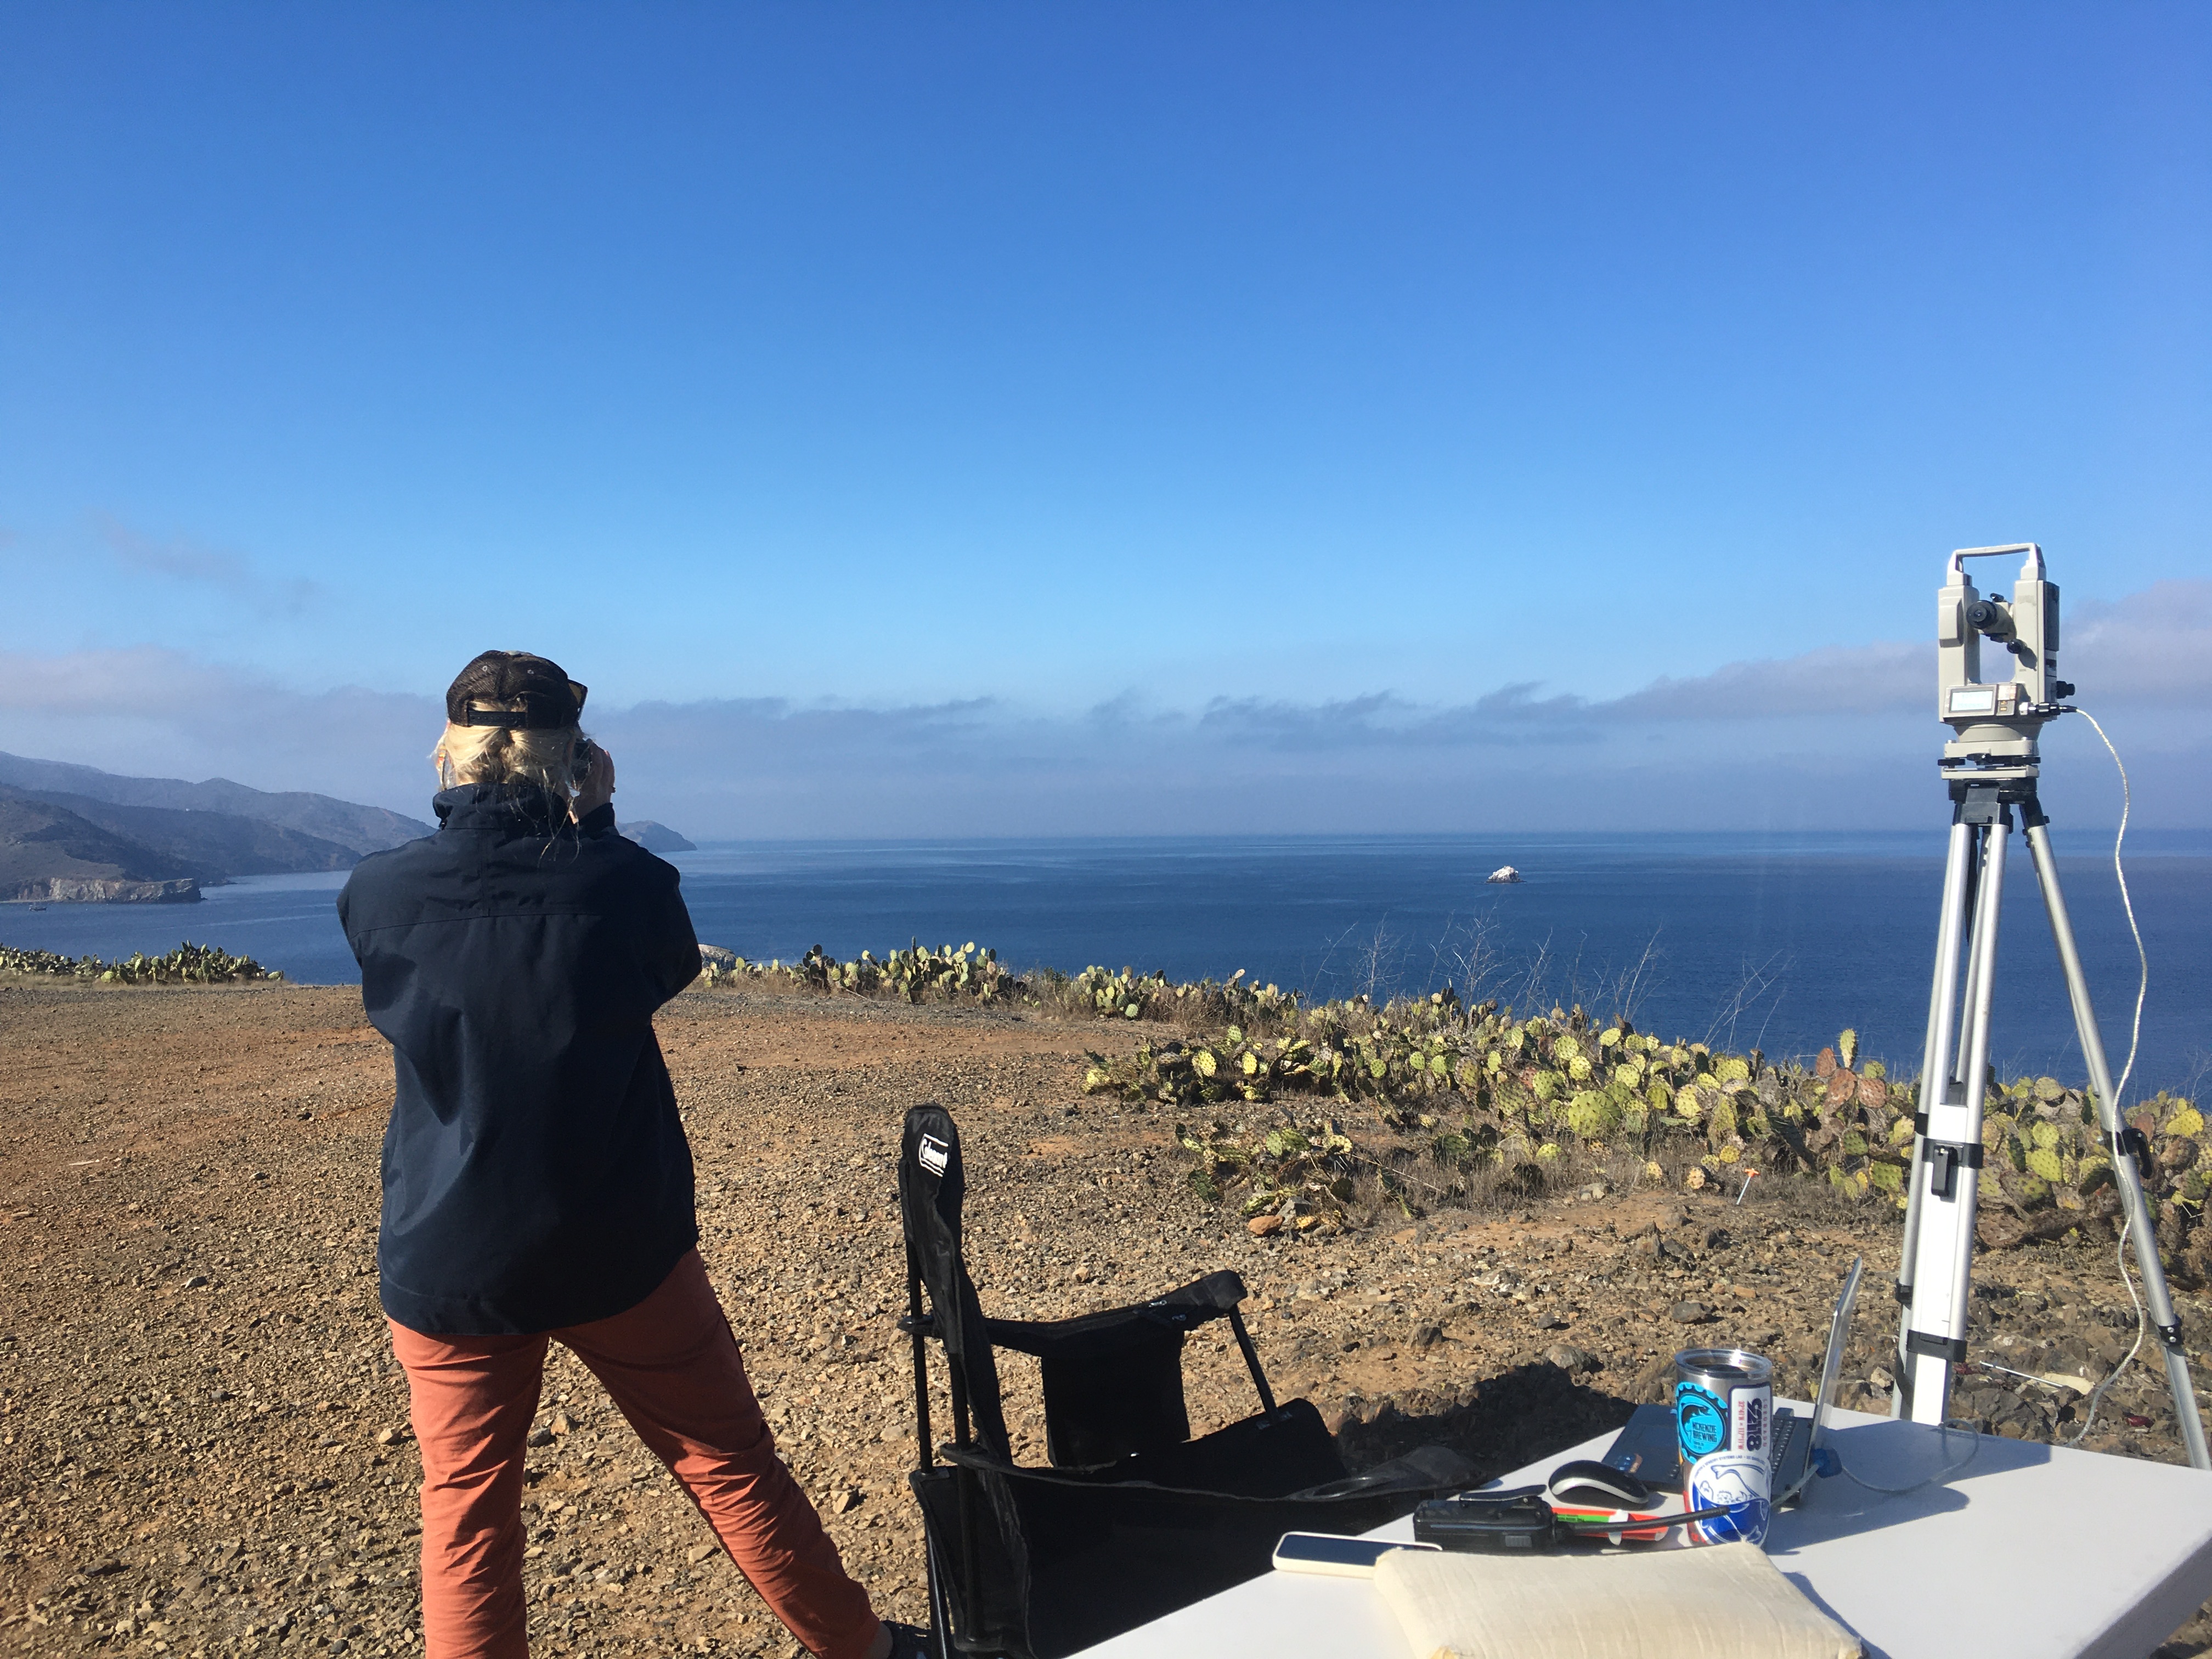 A person is standing on a cliff 
				overlooking the ocean. They are wearing a hat and black jacket standing next to a table with a 
				theodolite set up on their right.